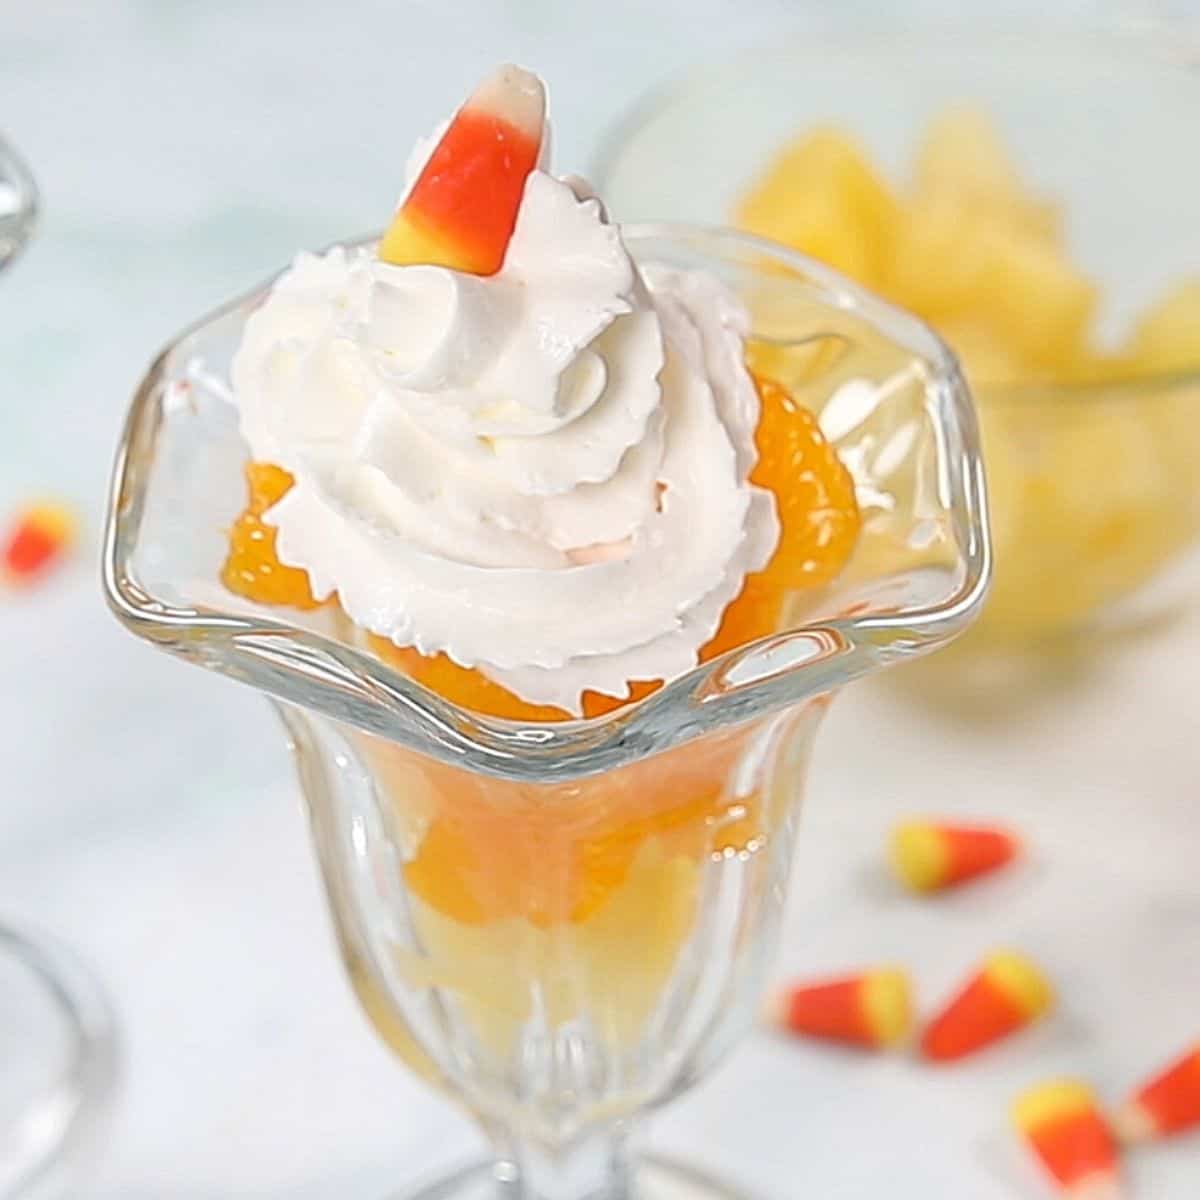 Layered fruit in glass parfait dish topped with candy corn.